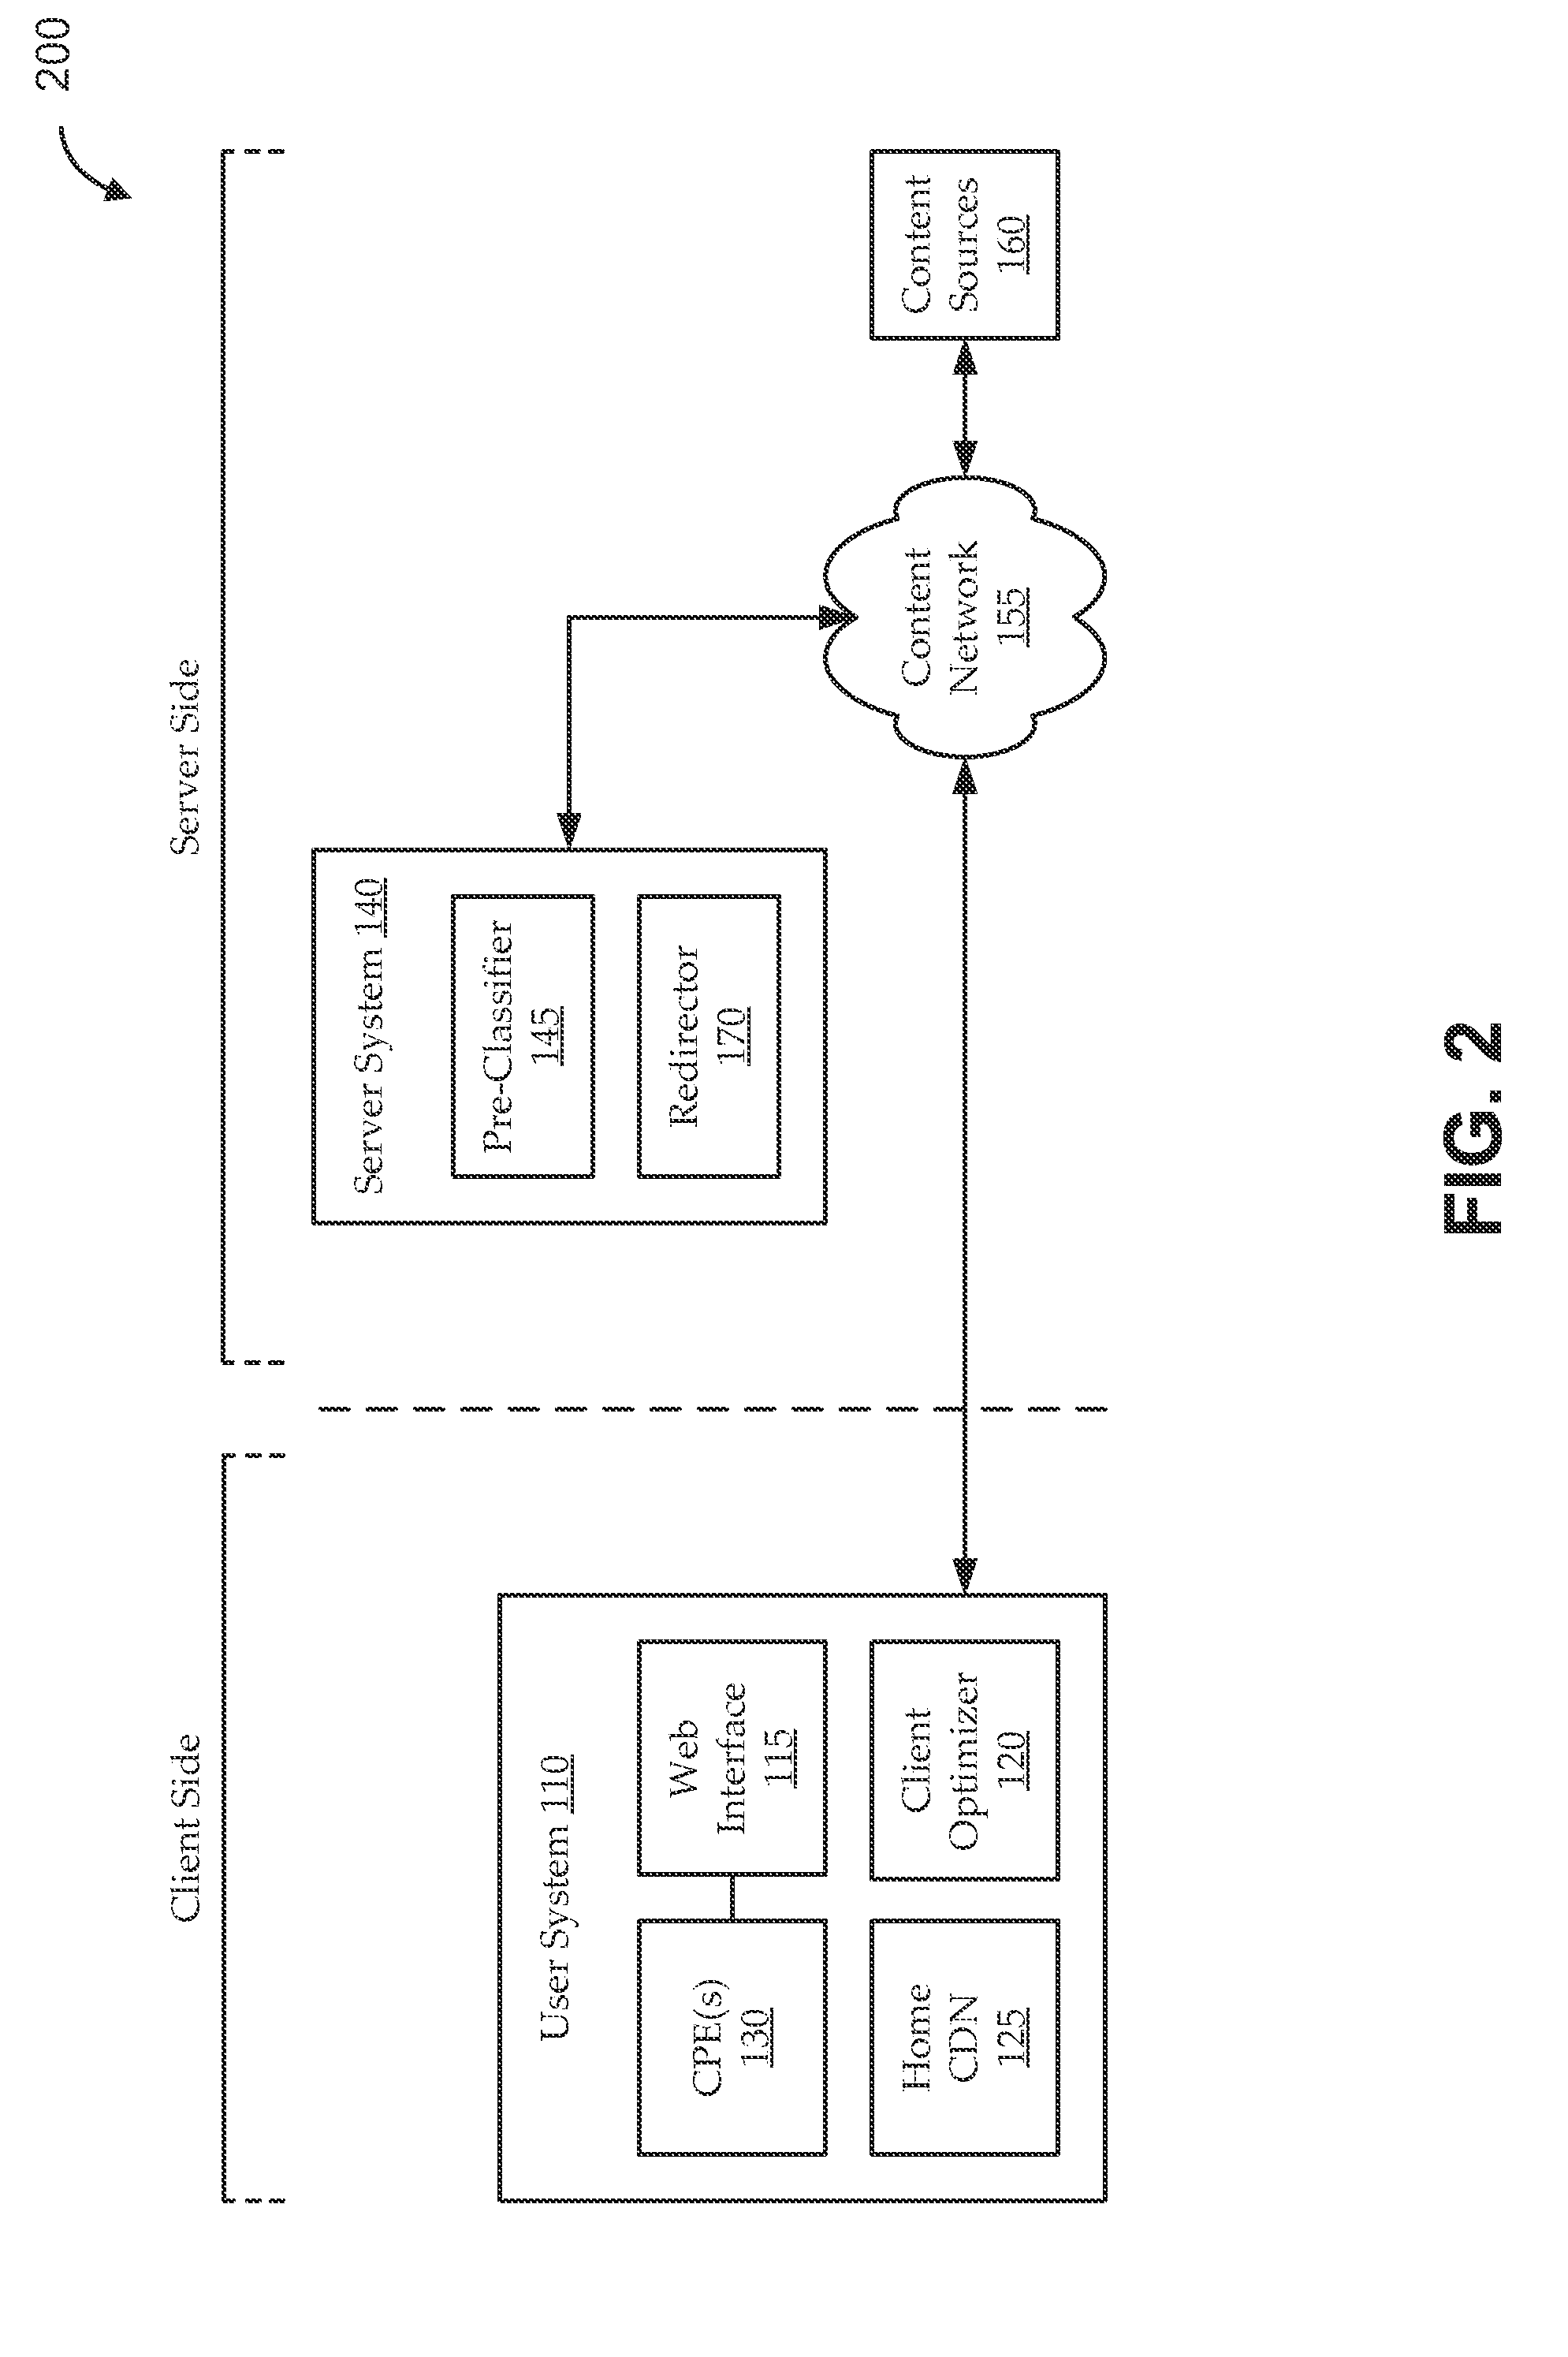 Page element identifier pre-classification for user interface behavior in a communications system